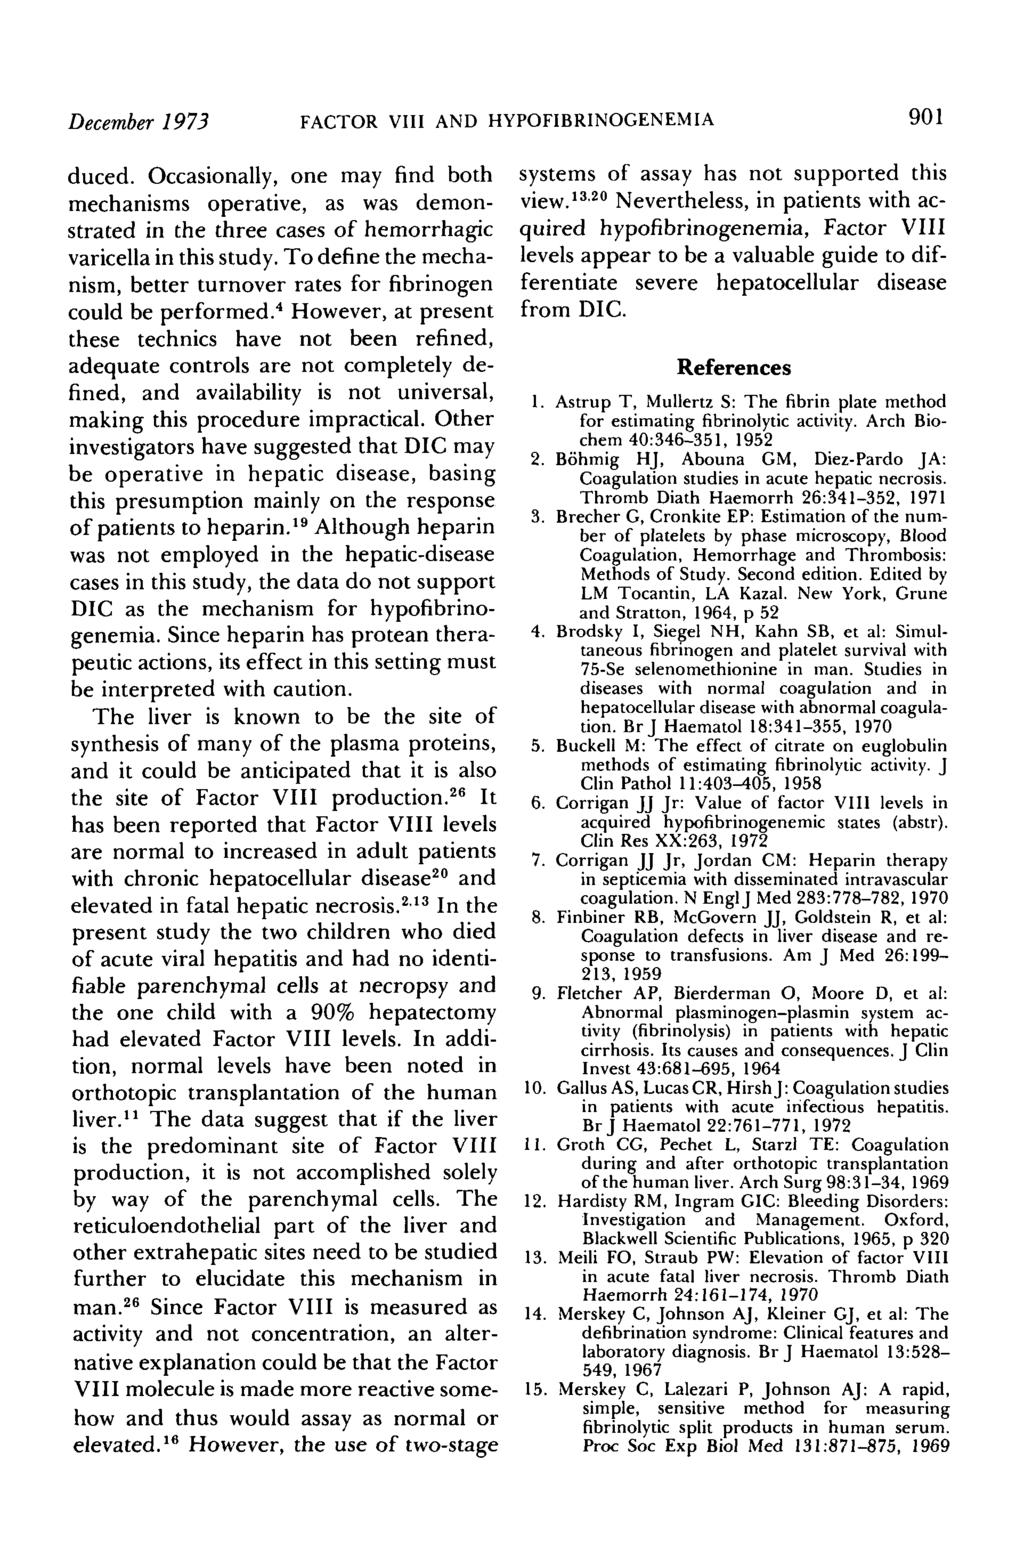 December 1973 FACTOR VIII A HYPOFIBRINOGENEMIA 901 duced. Occasionally, one may find both mechanisms operative, as was demonstrated in the three cases of hemorrhagic varicella in this study.